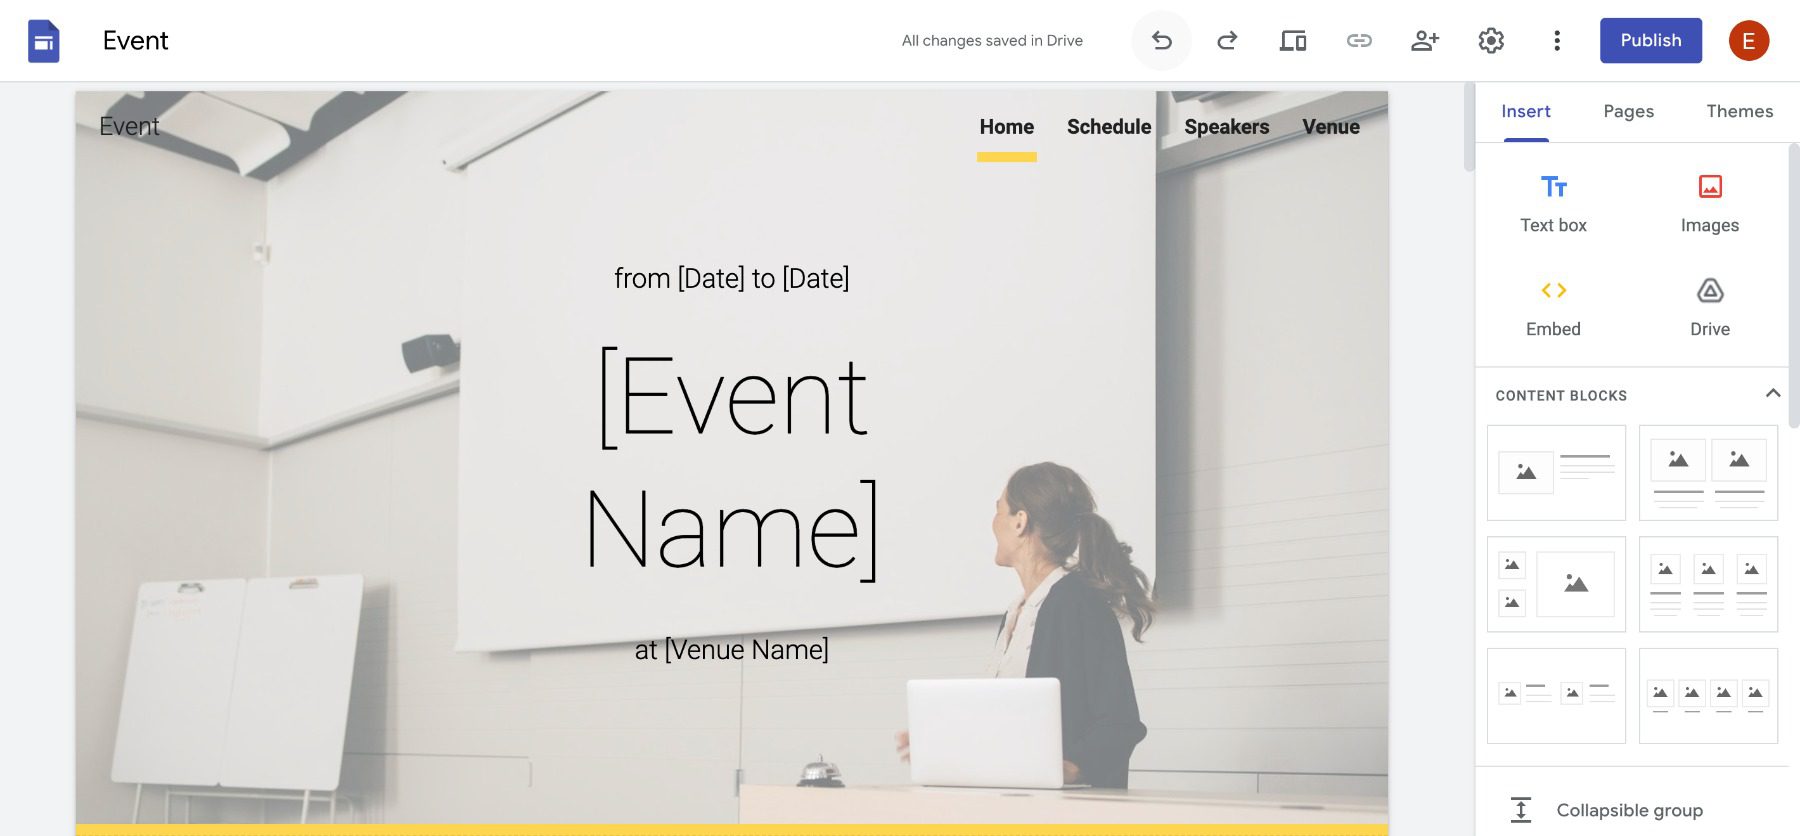 google sites event page